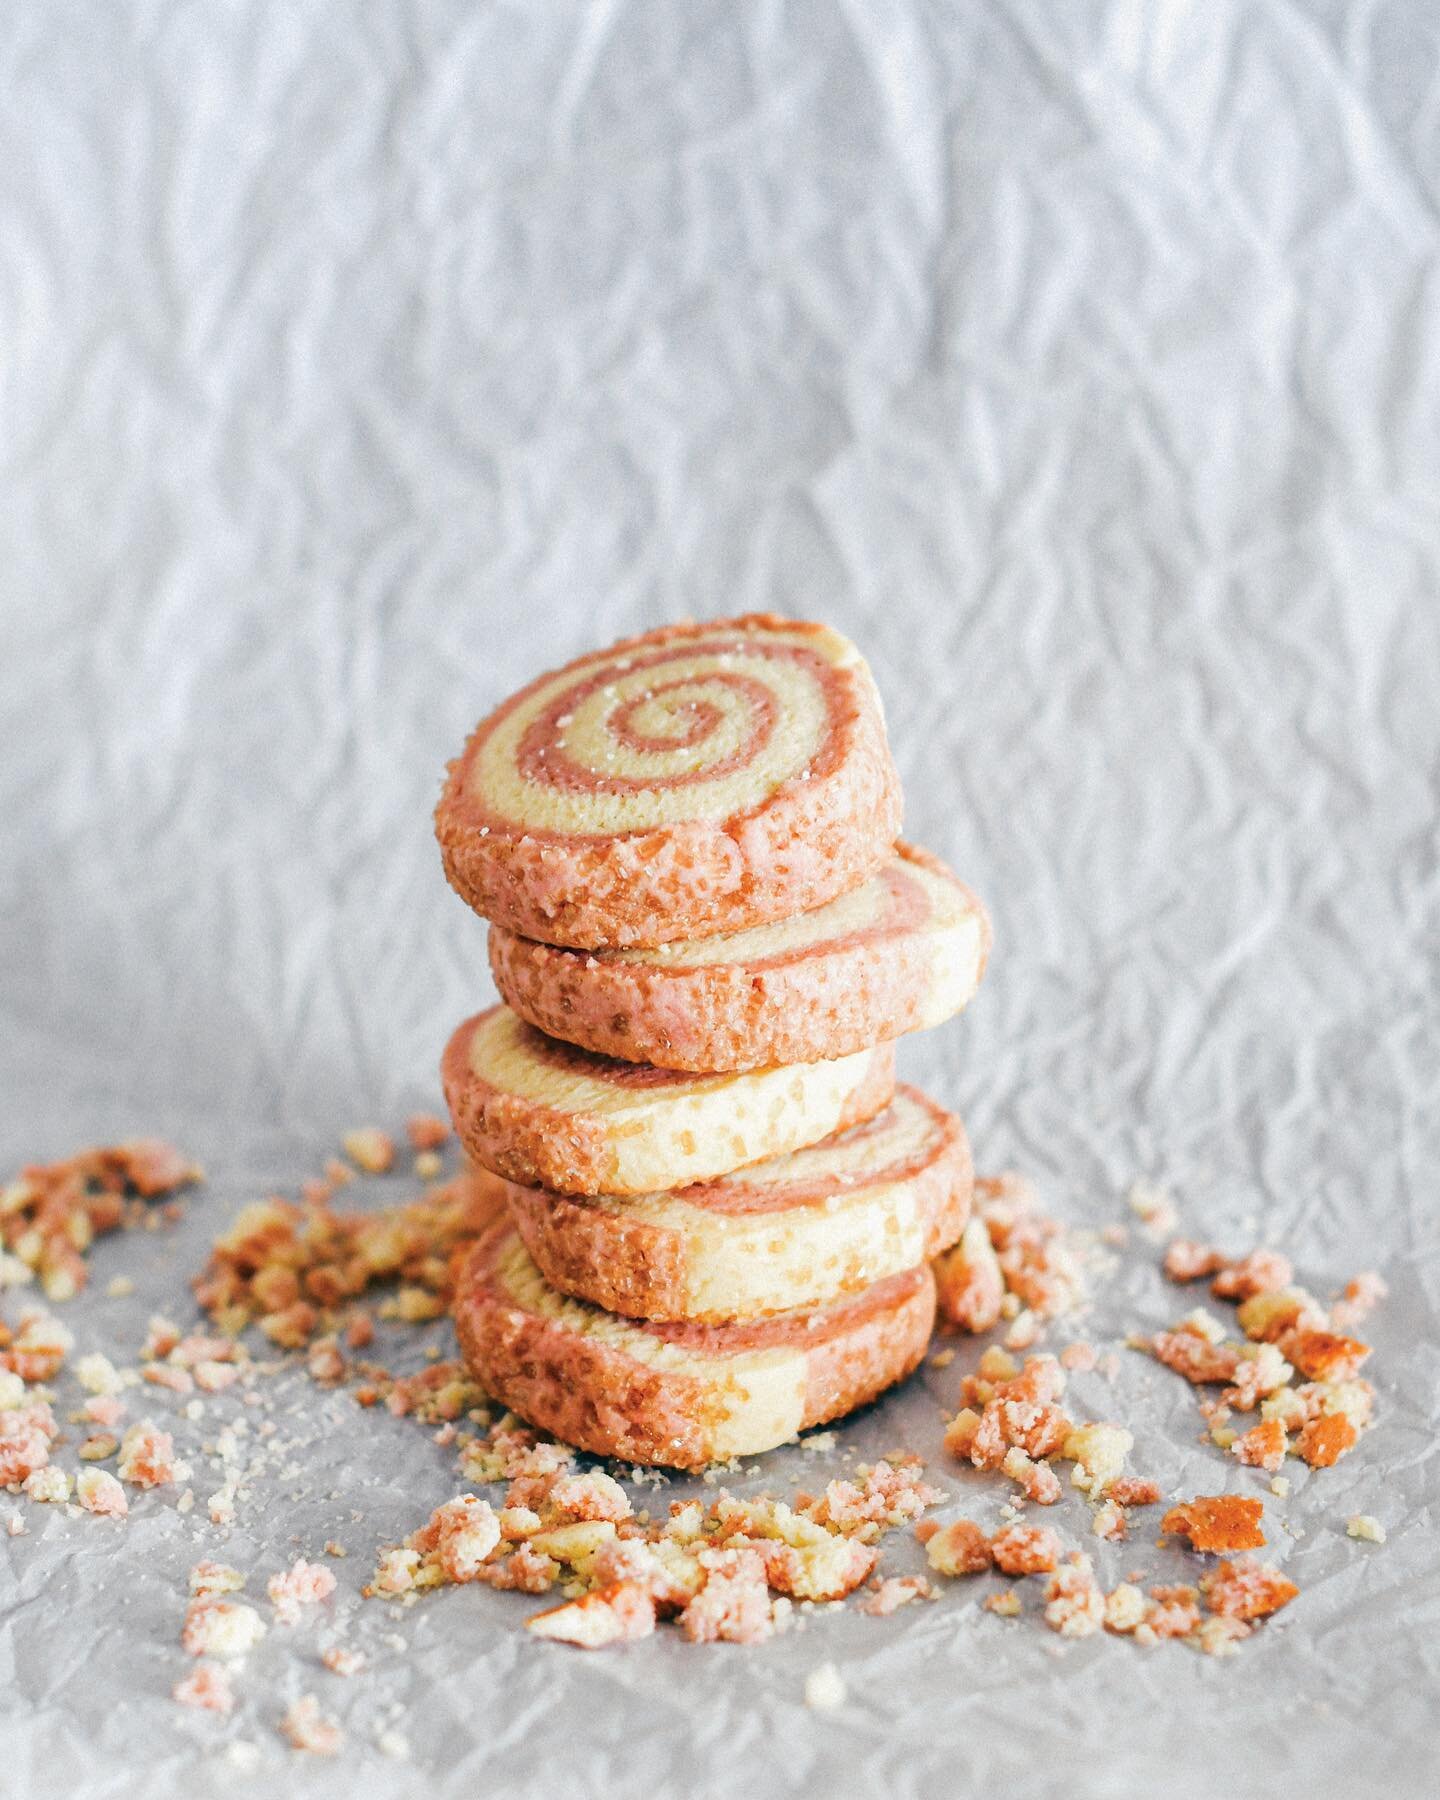 The issue 24 recipe&mdash;Almond Pinwheel Cookies with Sue&rsquo;s Strawberry Jam, created &amp; photographed by Lauren Wilcox (@lauren.m.wilcox), inspired by her mom (hi, Sue!!)

These cookies are a perfect spring/summer recipe, easily swapped out w